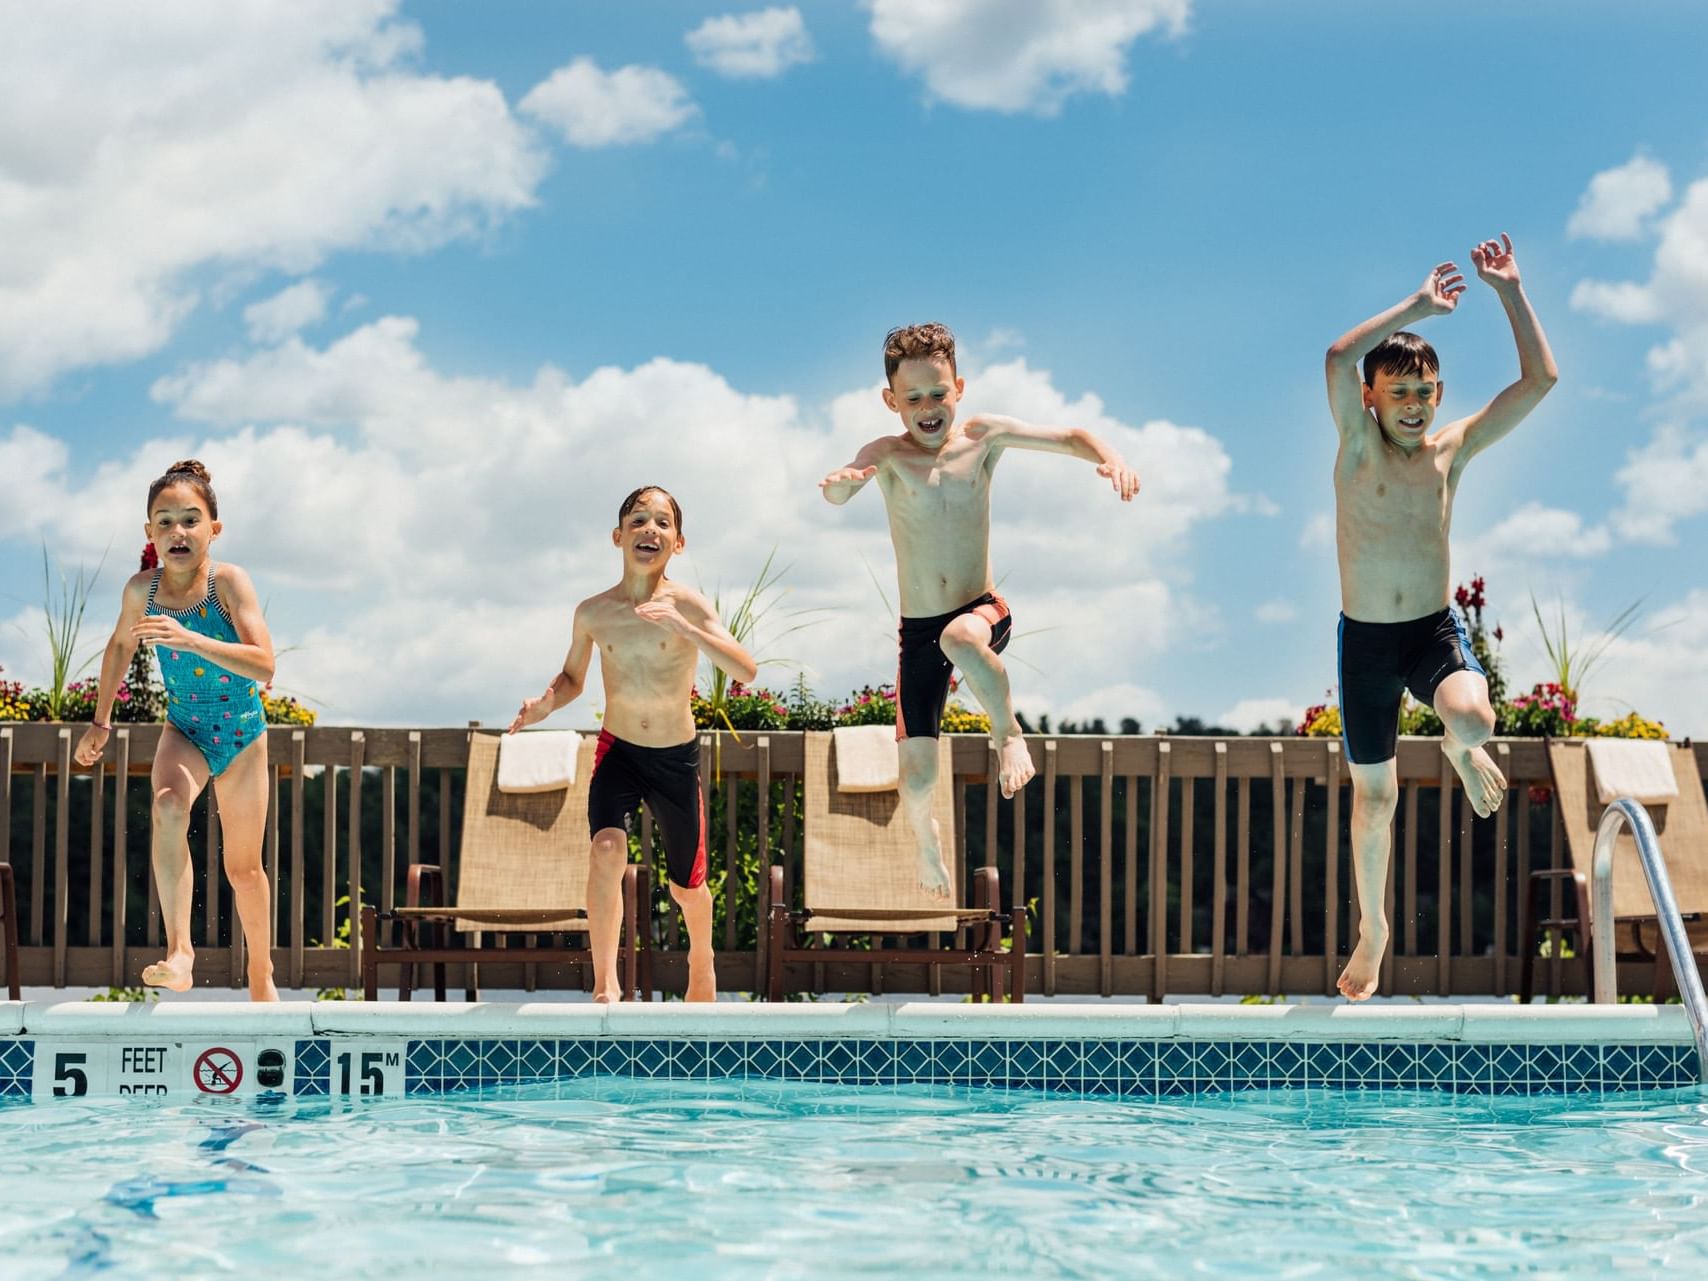 Four children jumping into the waterfront pool.